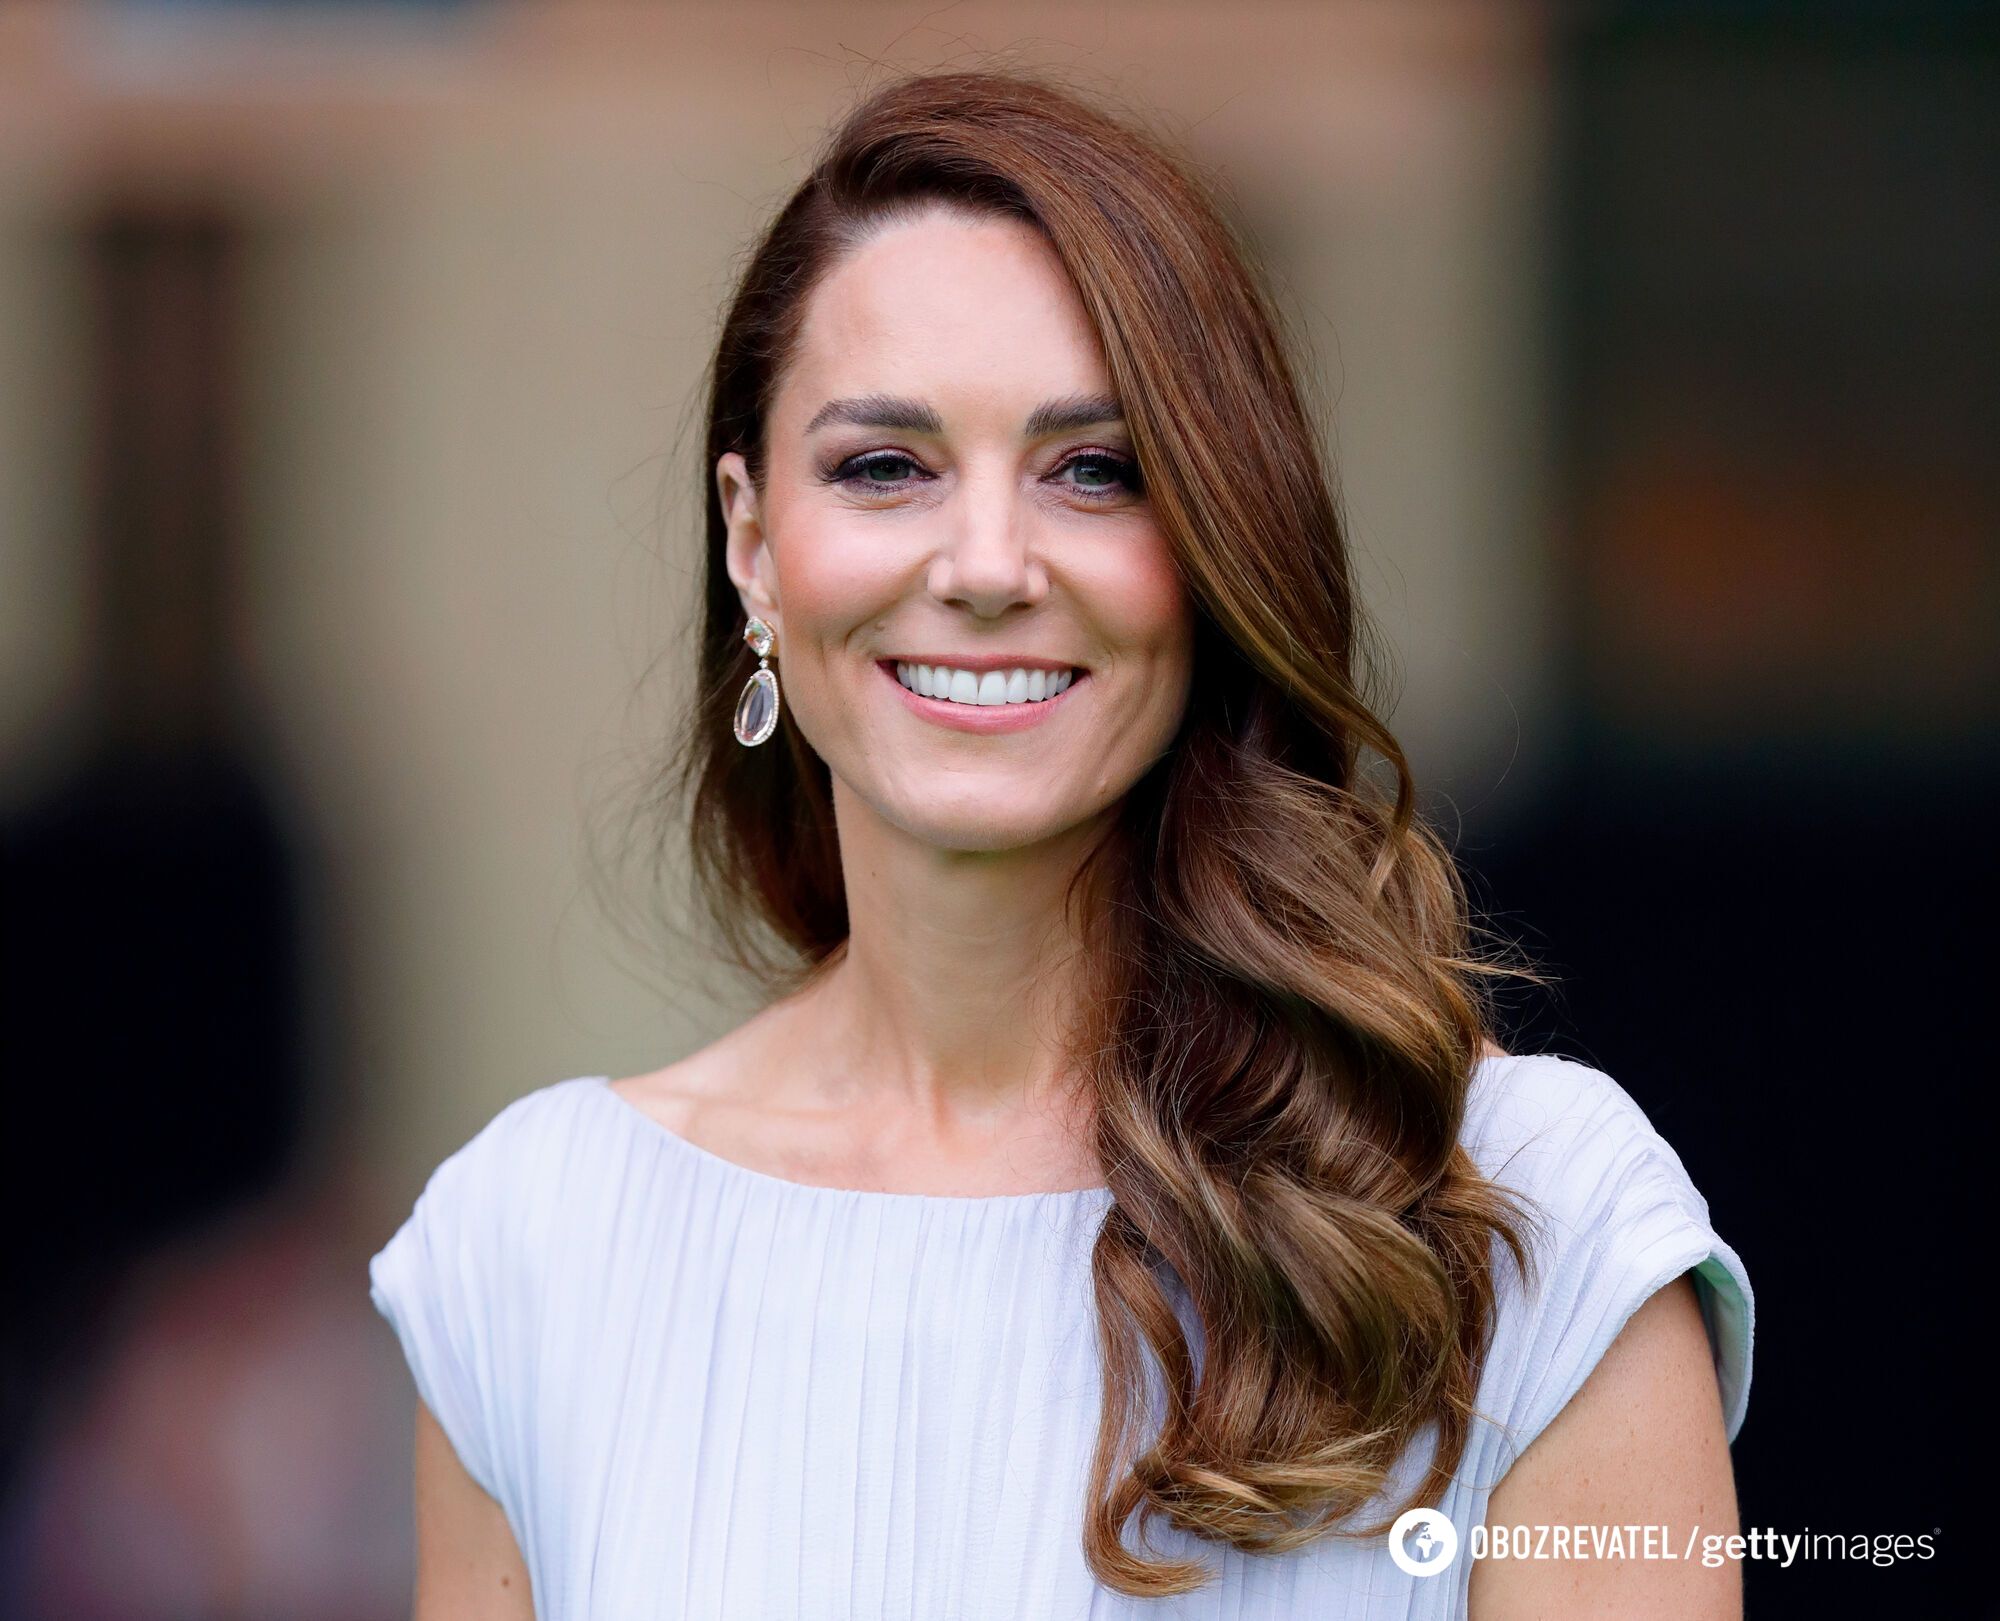 ''The worst is over'': new details have emerged about the condition of Kate Middleton, who is battling cancer